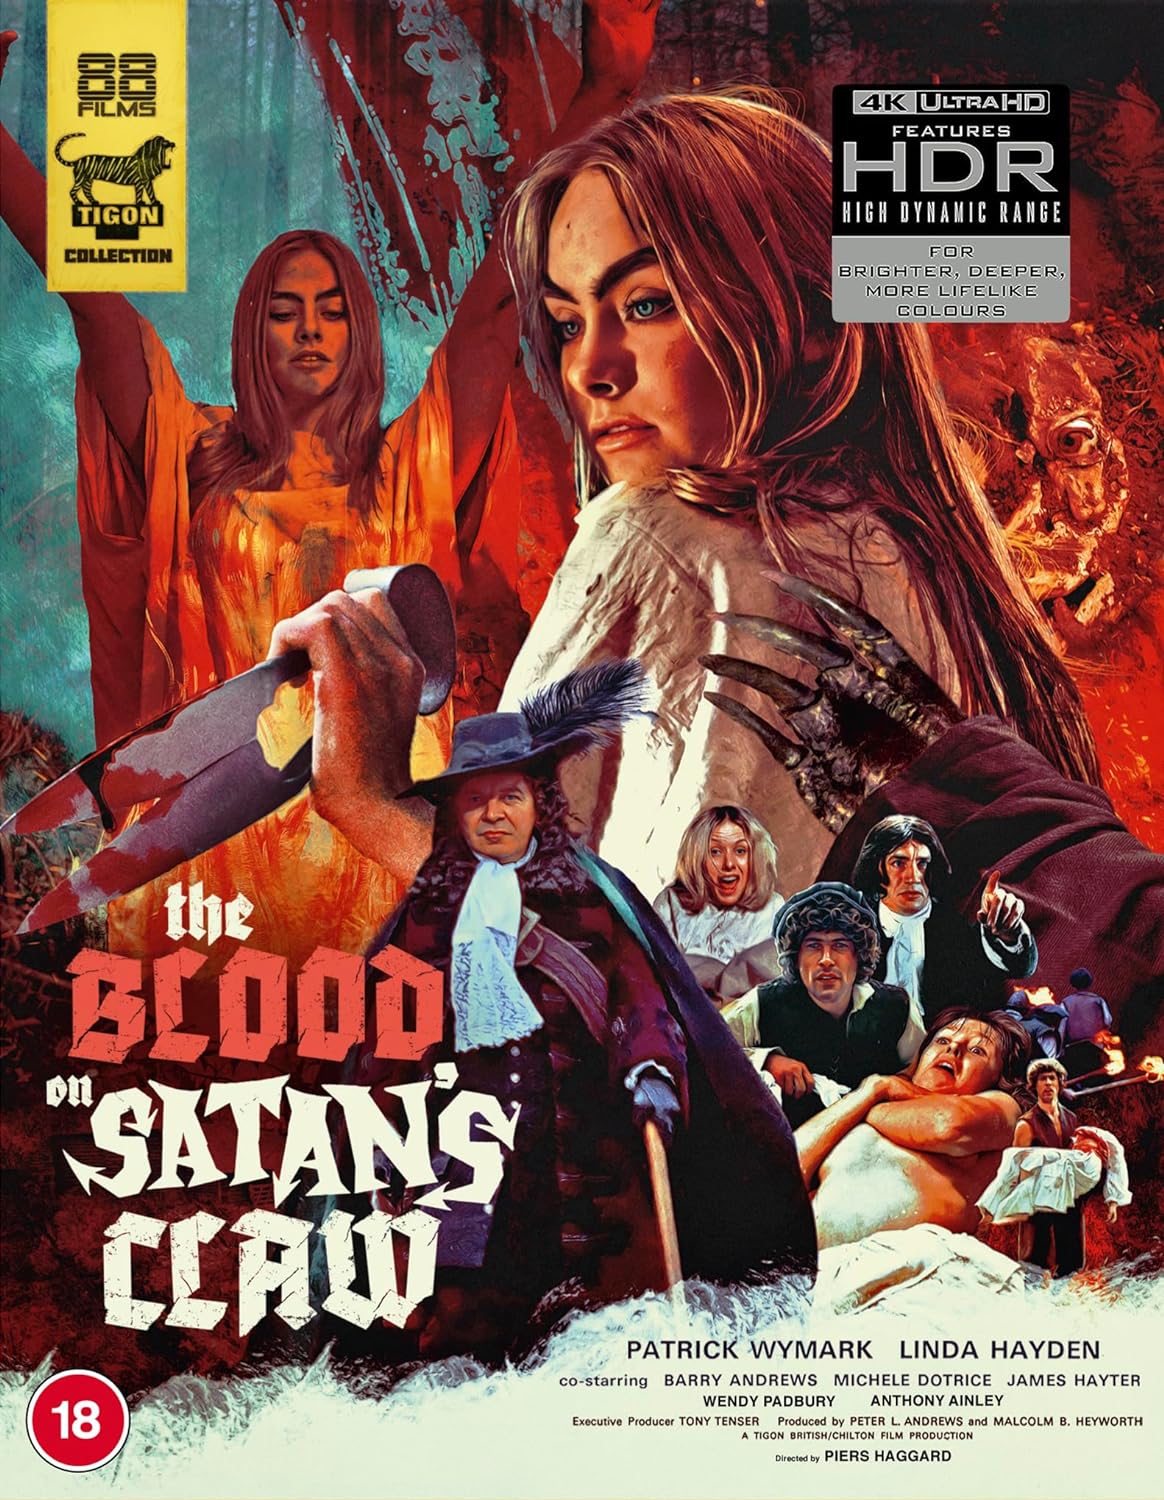 The Blood of Satan's Claw 4K UHD with Slipcover (88 FIlms Tigon Collection/Region Free/B) [Preorder]